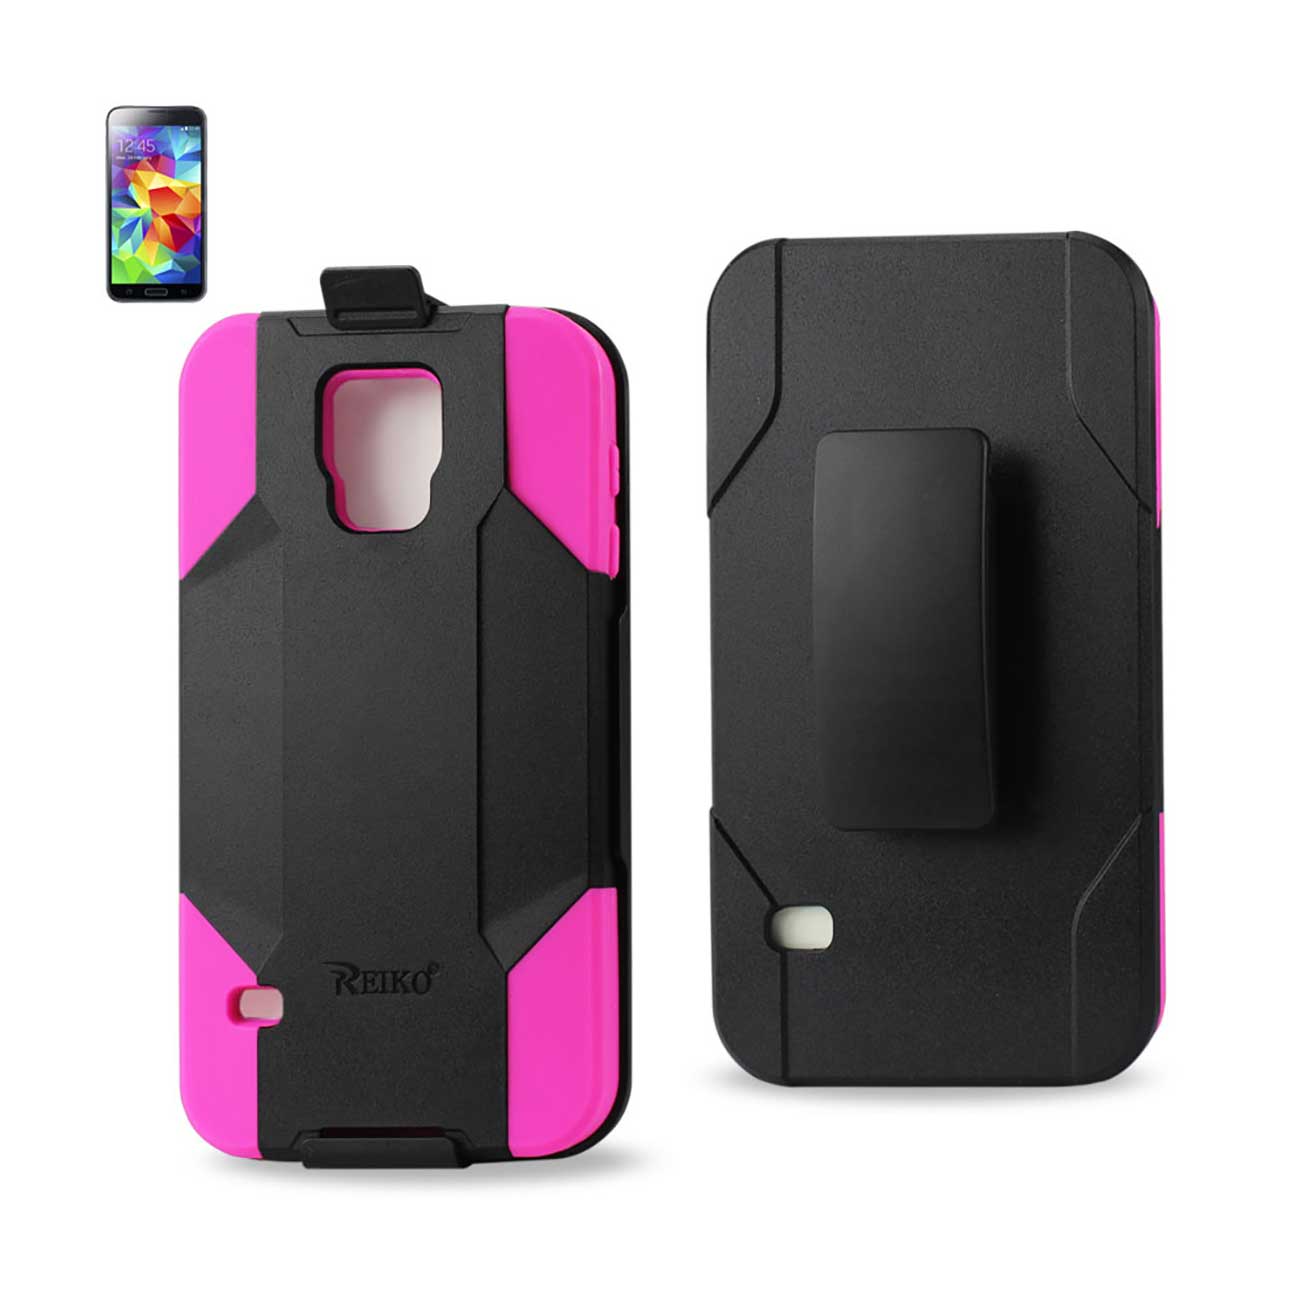 Samsung Galaxy S5 3-In-1 Hybrid Heavy Duty Holster Combo Case In Hot Pink Black